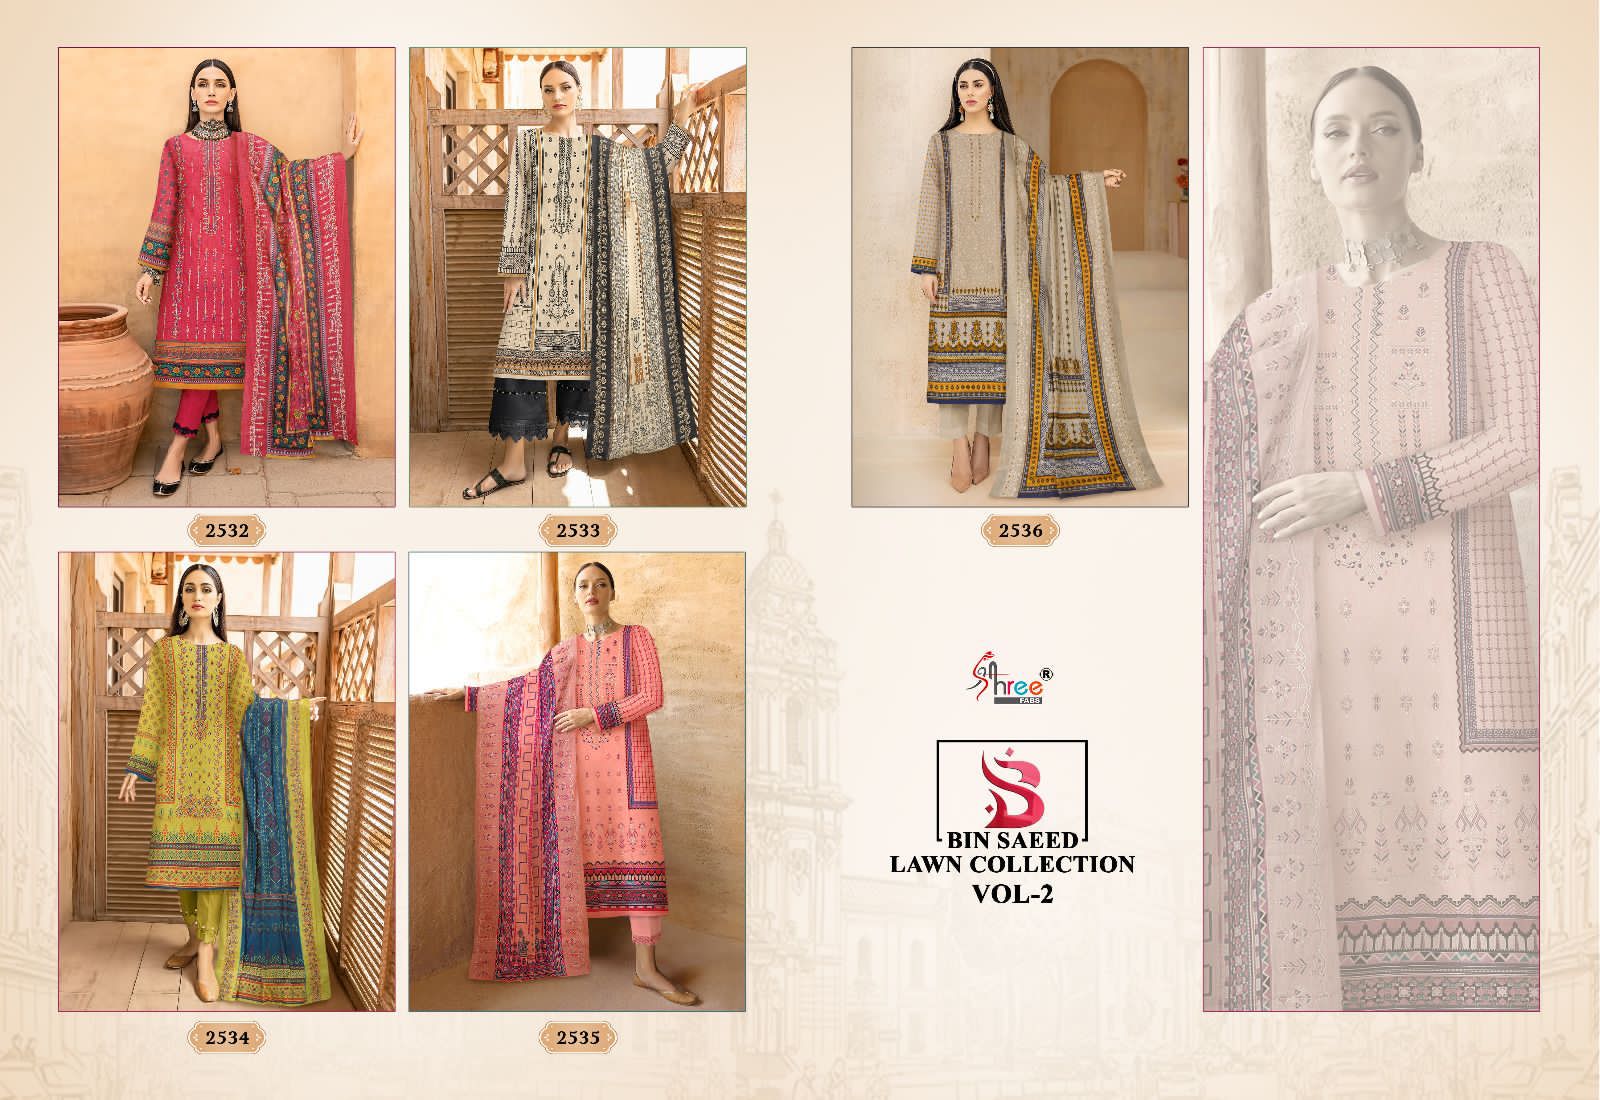 Shree Bin Saeed Lawn Collection Vol 2 collection 1